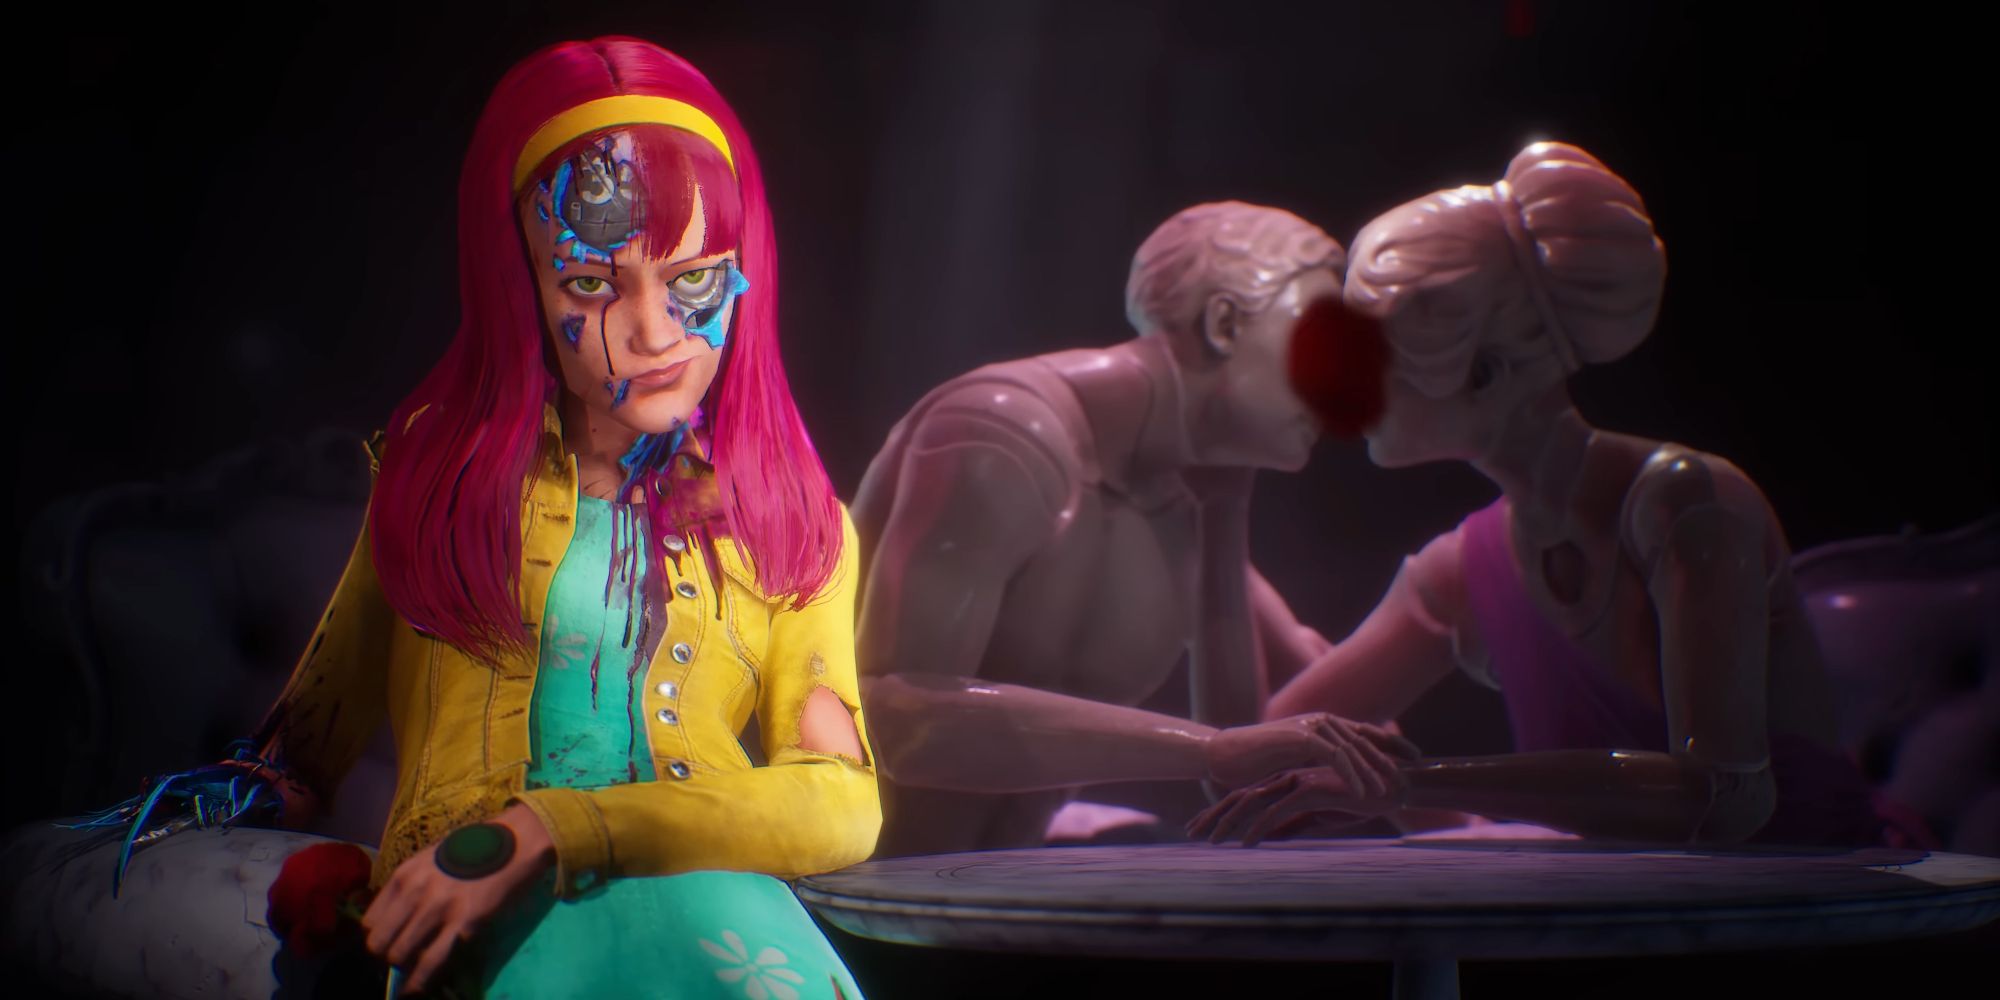 A pink-haired robotic woman from Judas looks mischievously at the camera. A romantic statue is in the background.